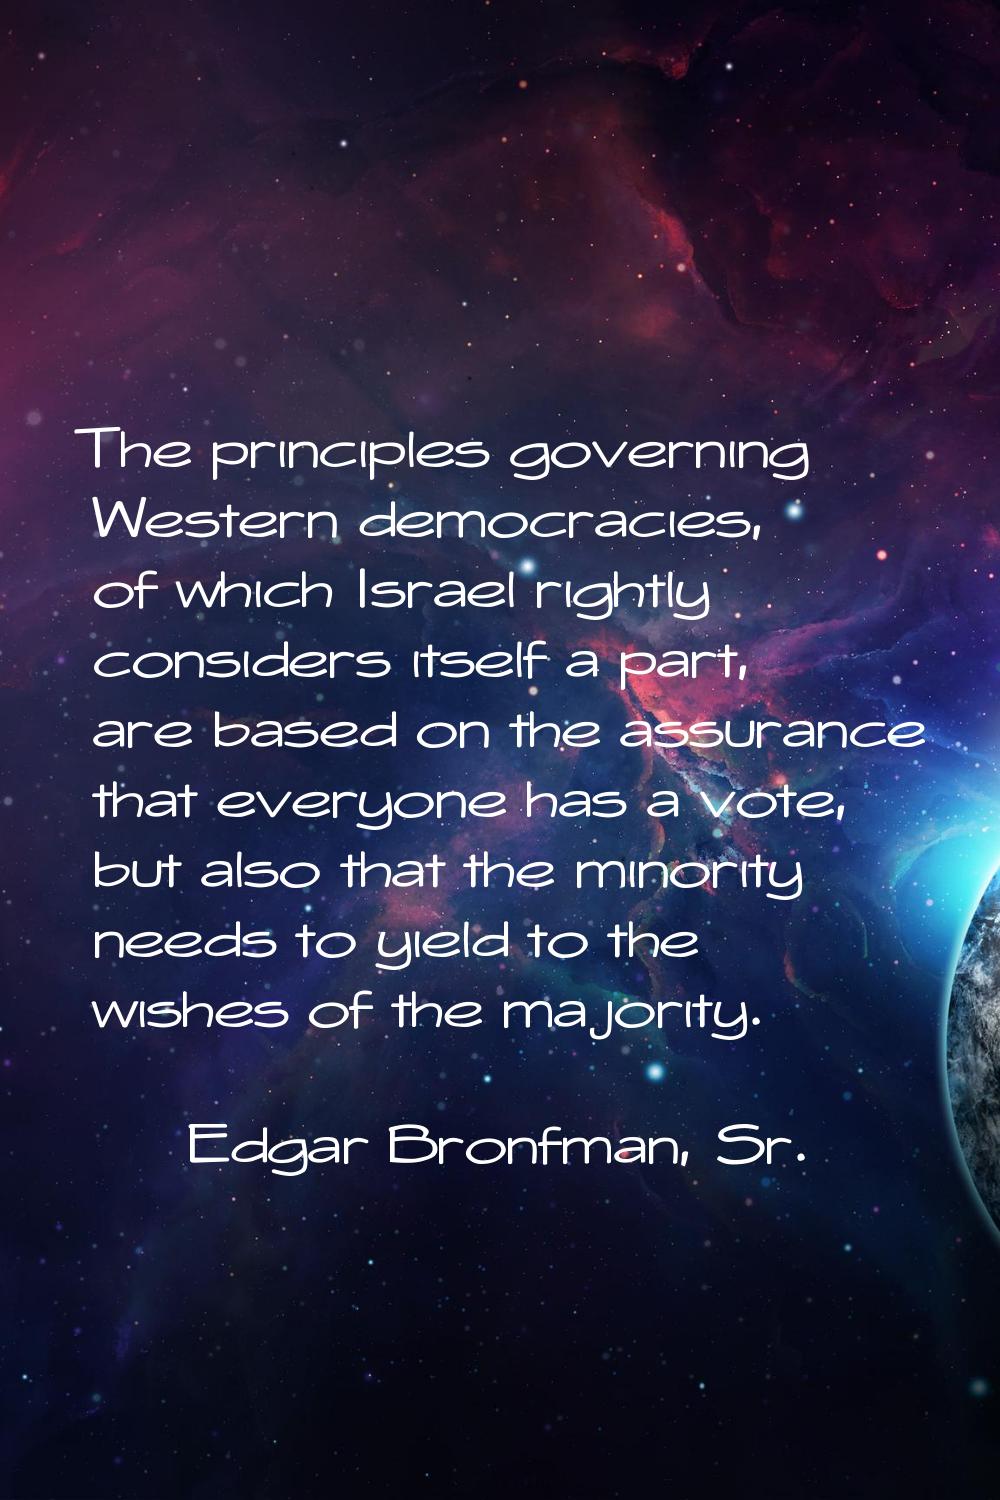 The principles governing Western democracies, of which Israel rightly considers itself a part, are 